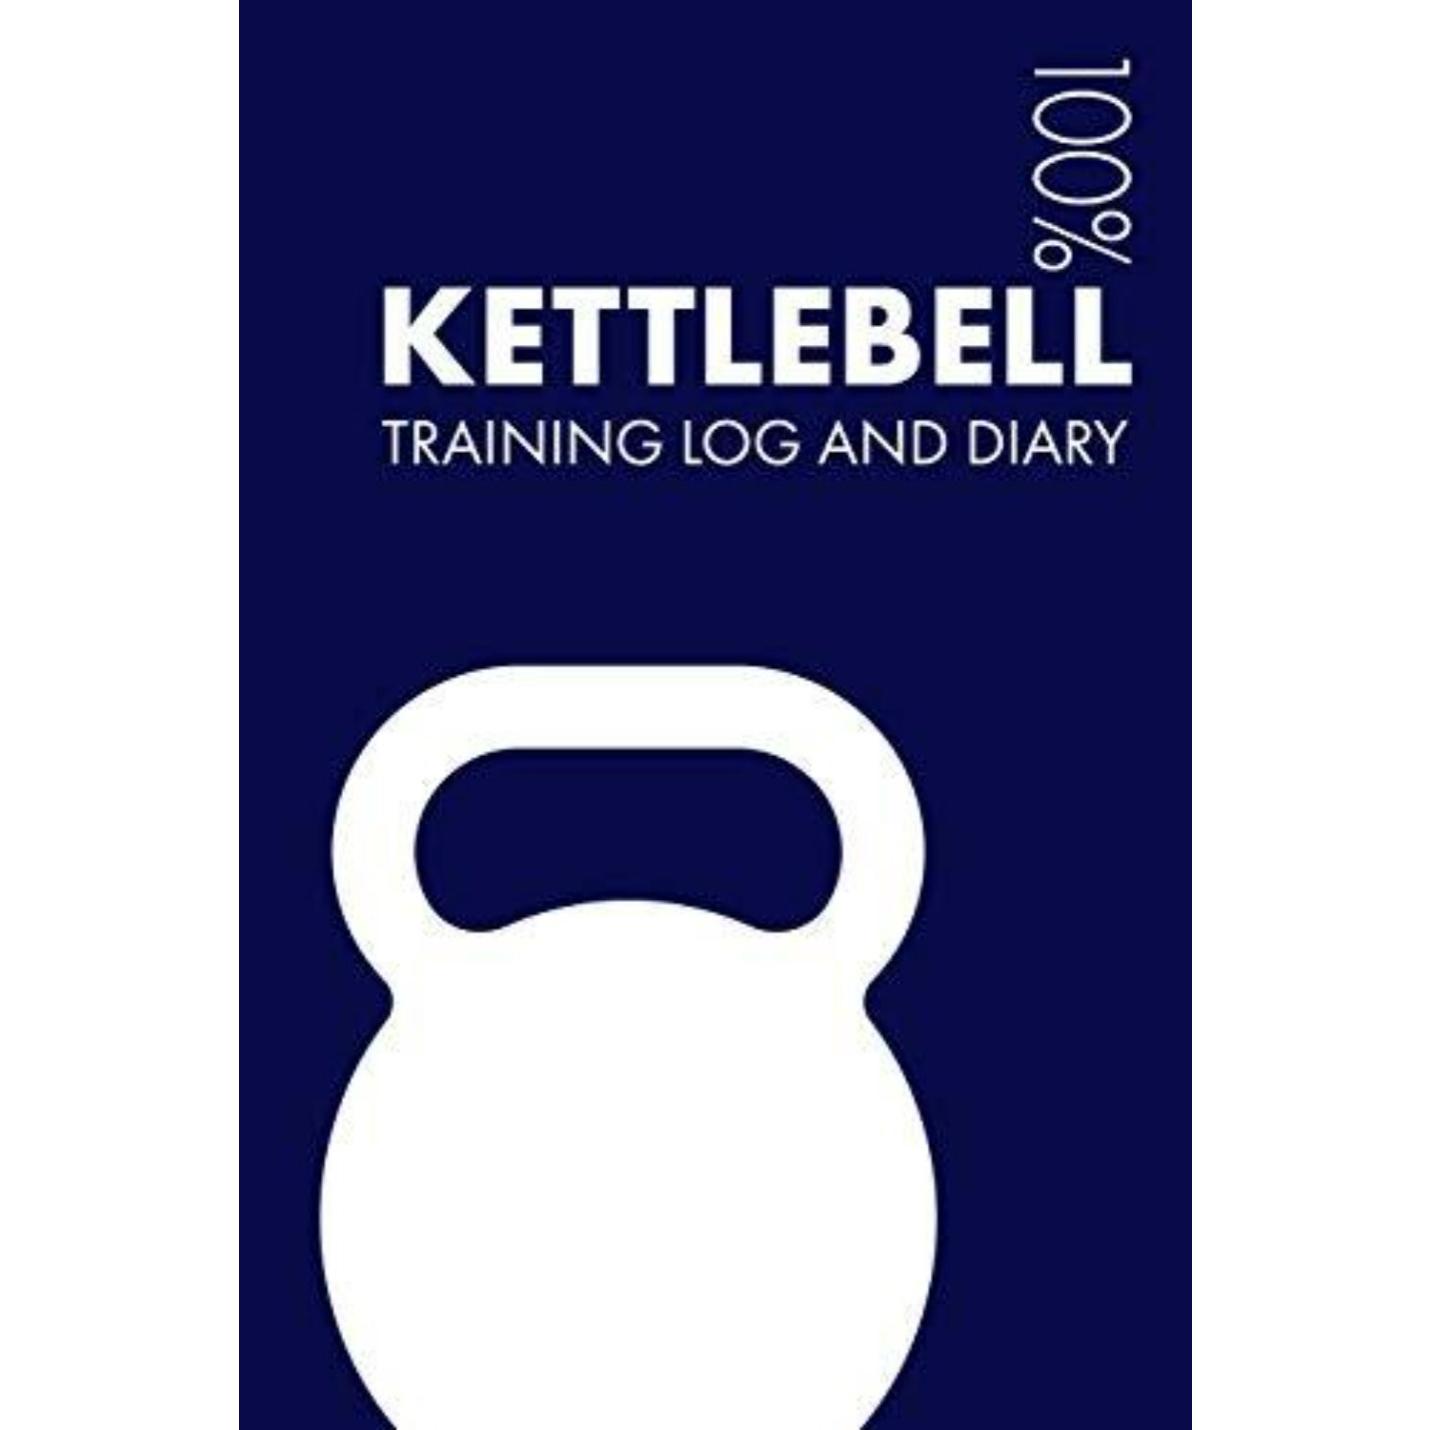 Kettlebell Training Log and Diary: Training Journal for Kettlebell - Notebook - happygetfit.com